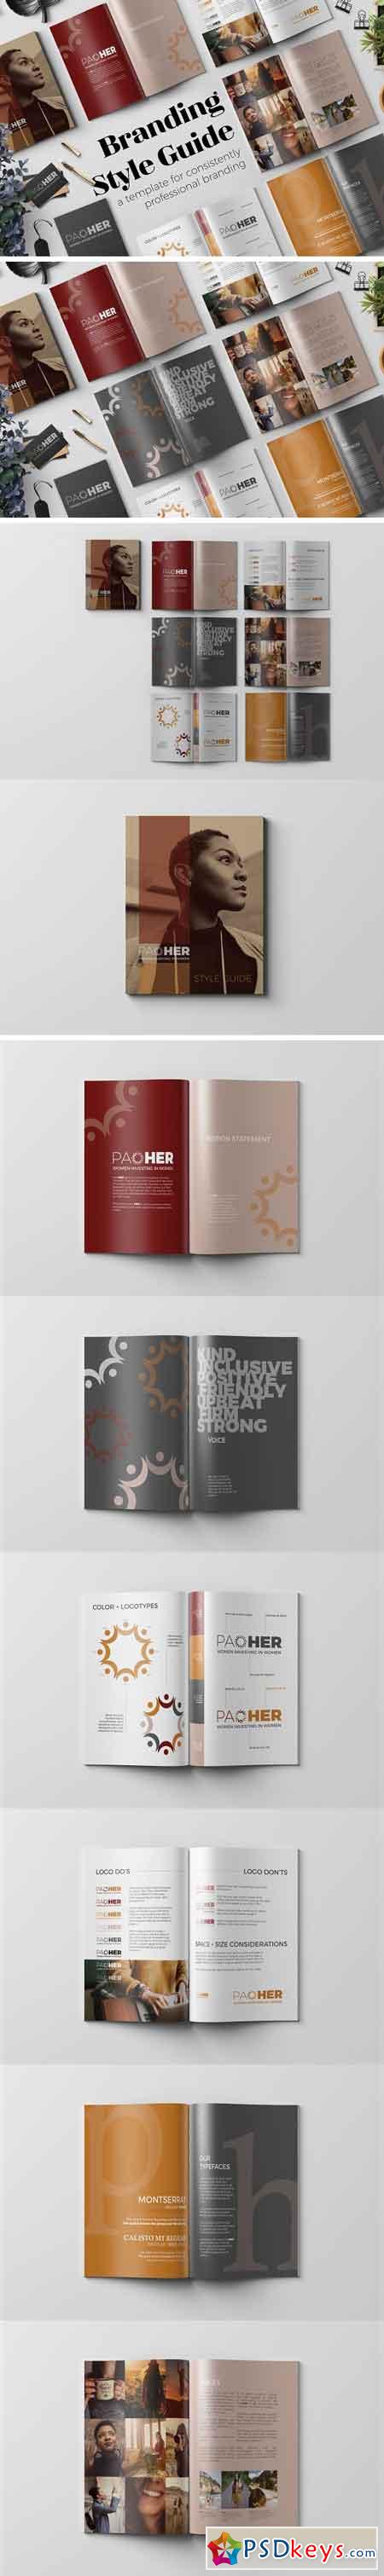 Branding Style Guide Template 2830964